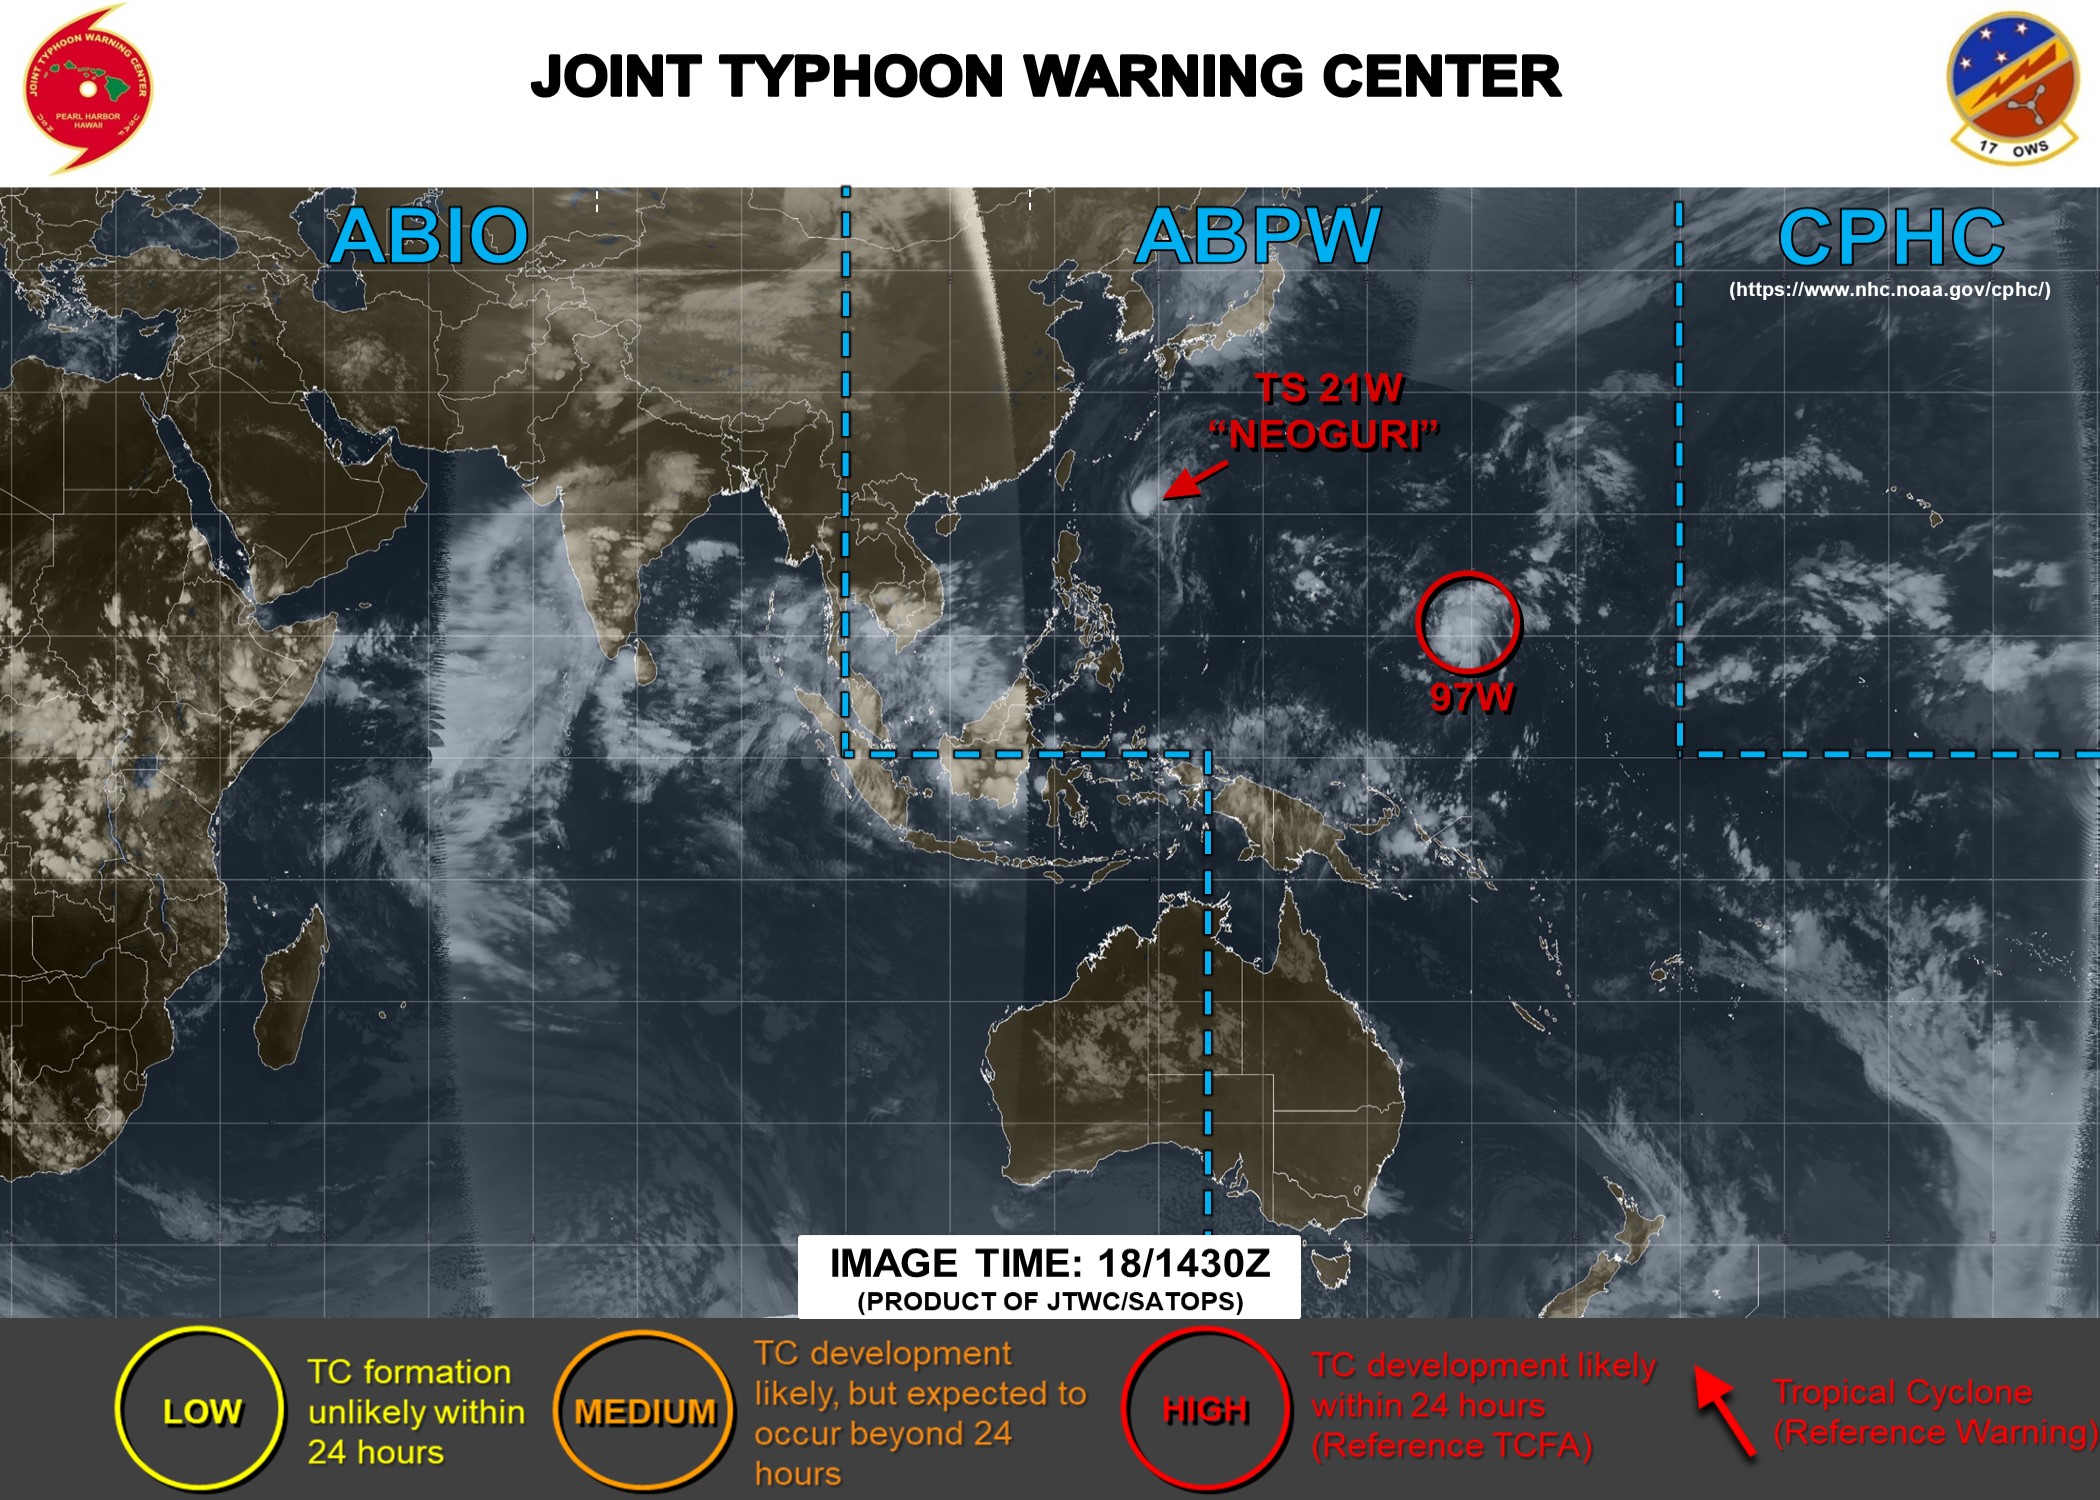 Invest 97W: Tropical Cyclone Formation Alert